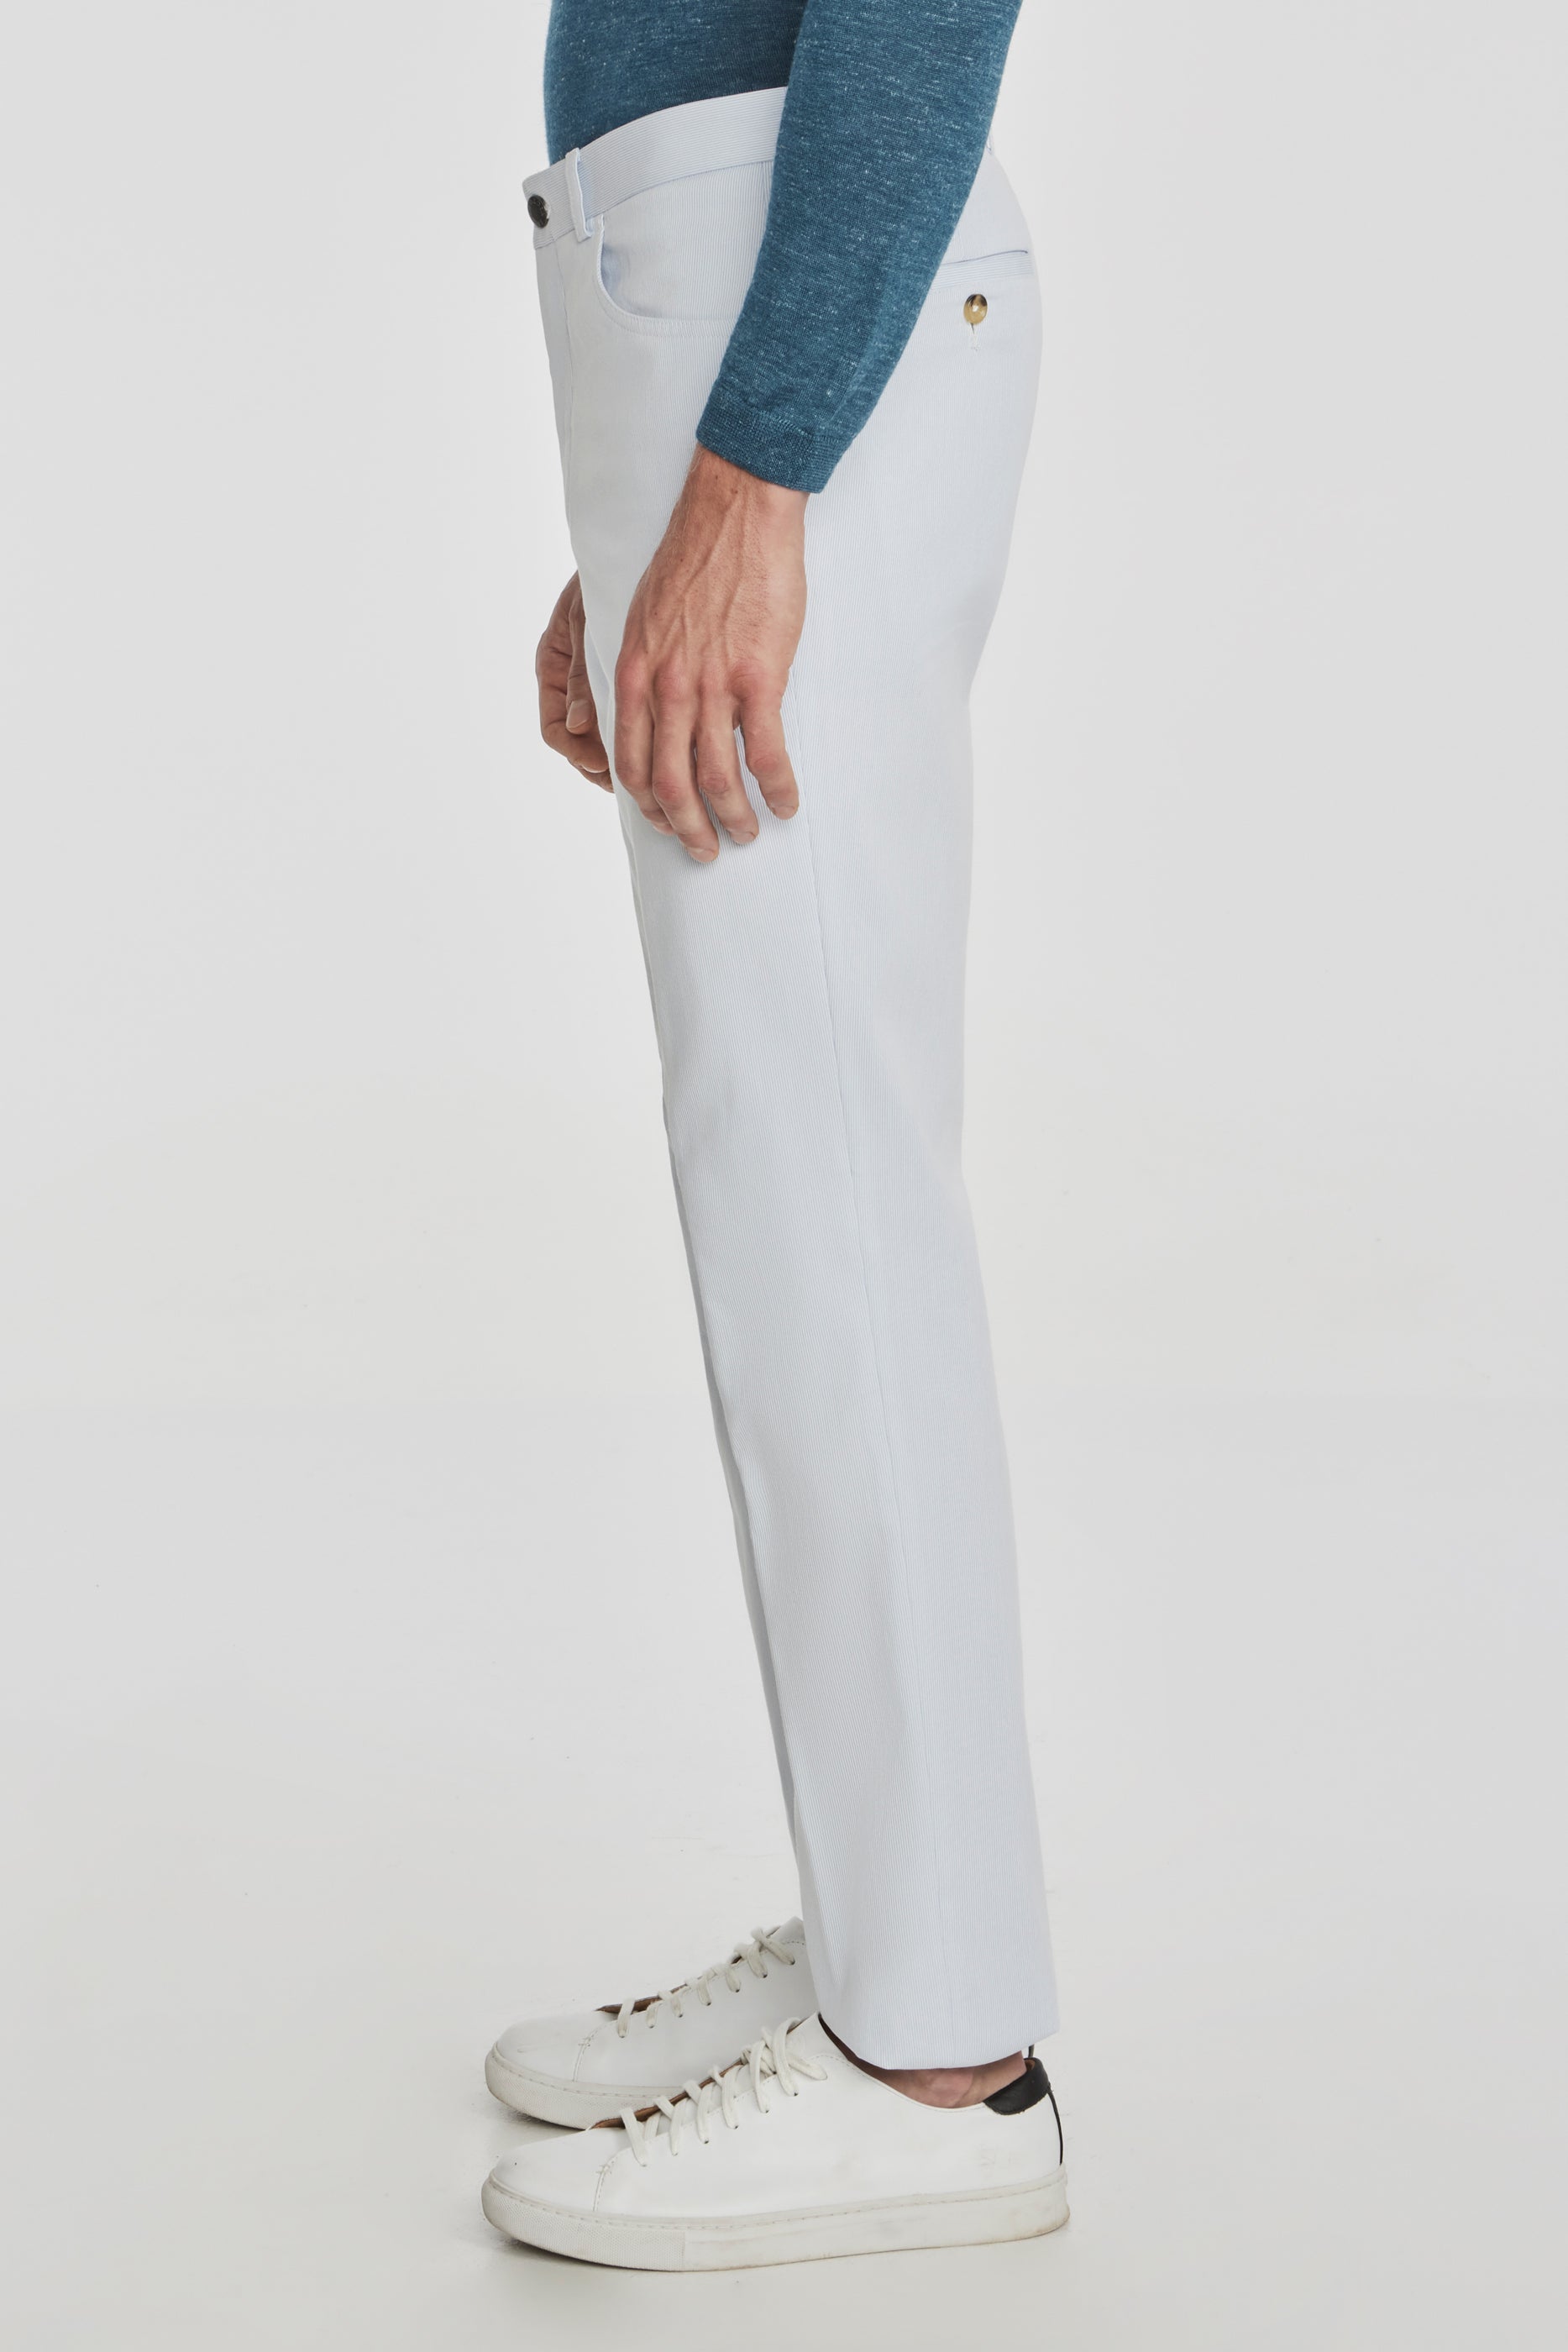 Alt view 3 Pinfeather Sage 5-Pocket Stretch Cotton Pant in Light Blue